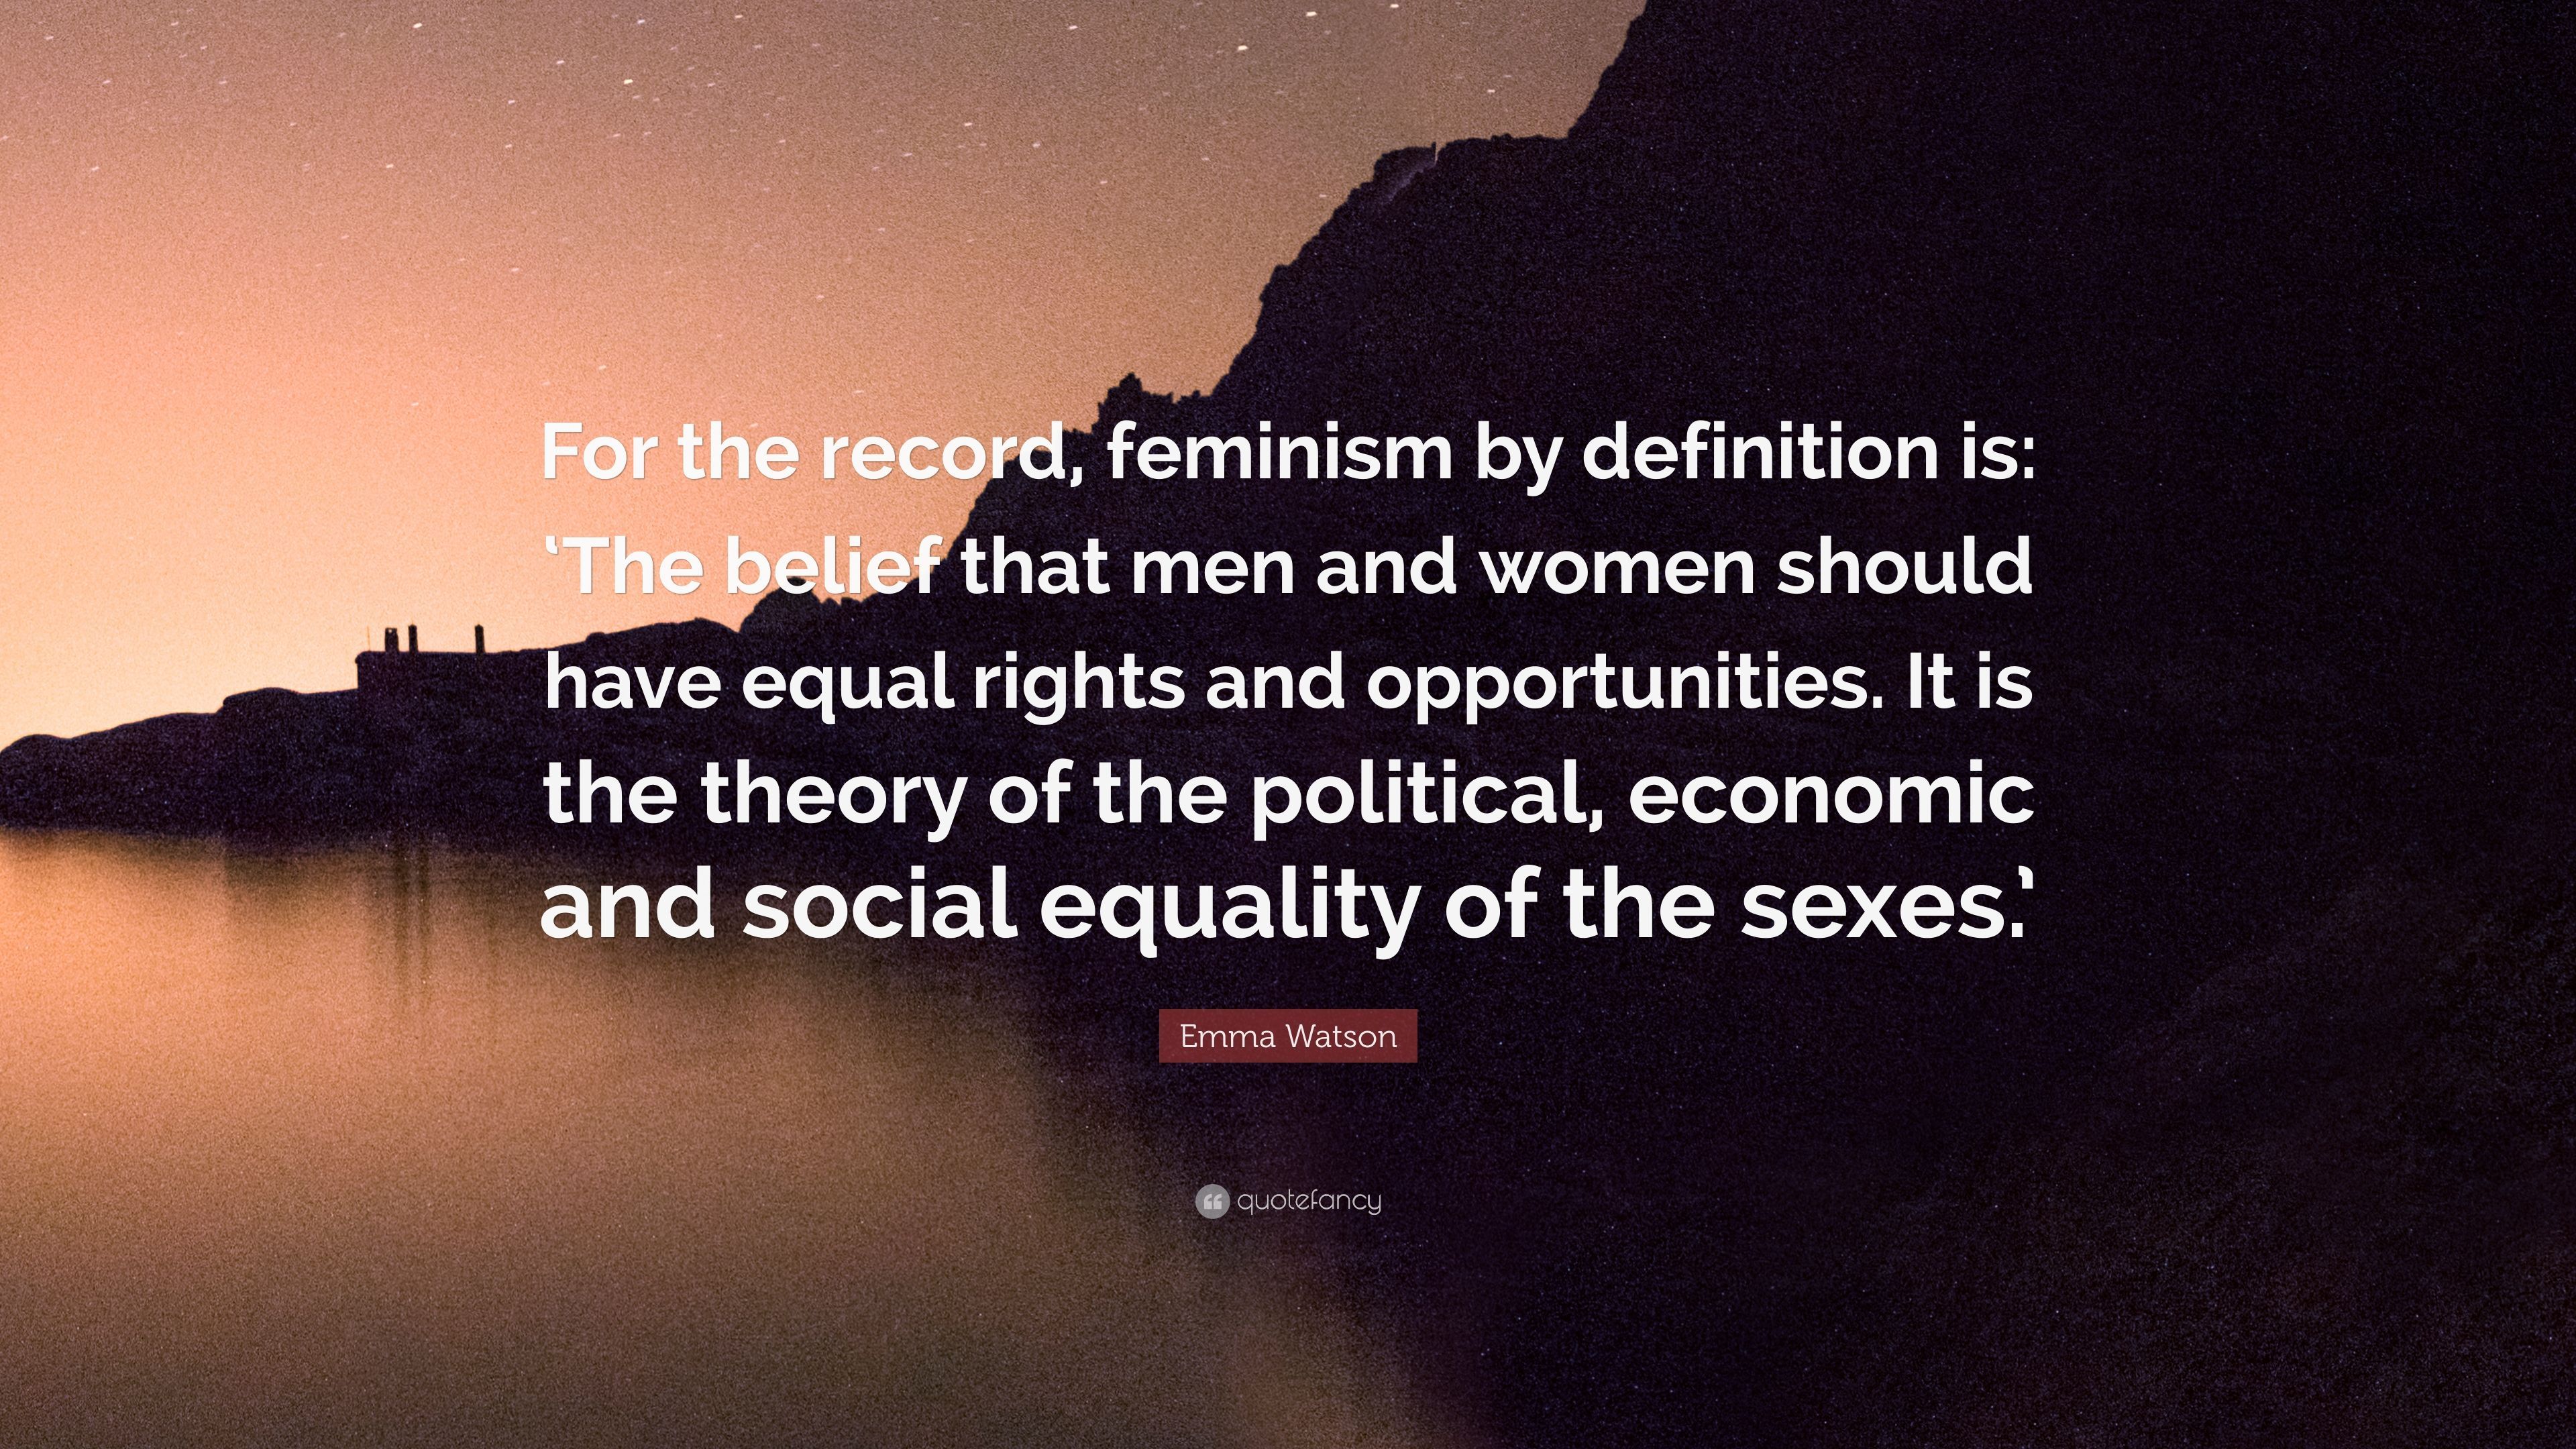 Emma Watson Quote: “For the record, feminism